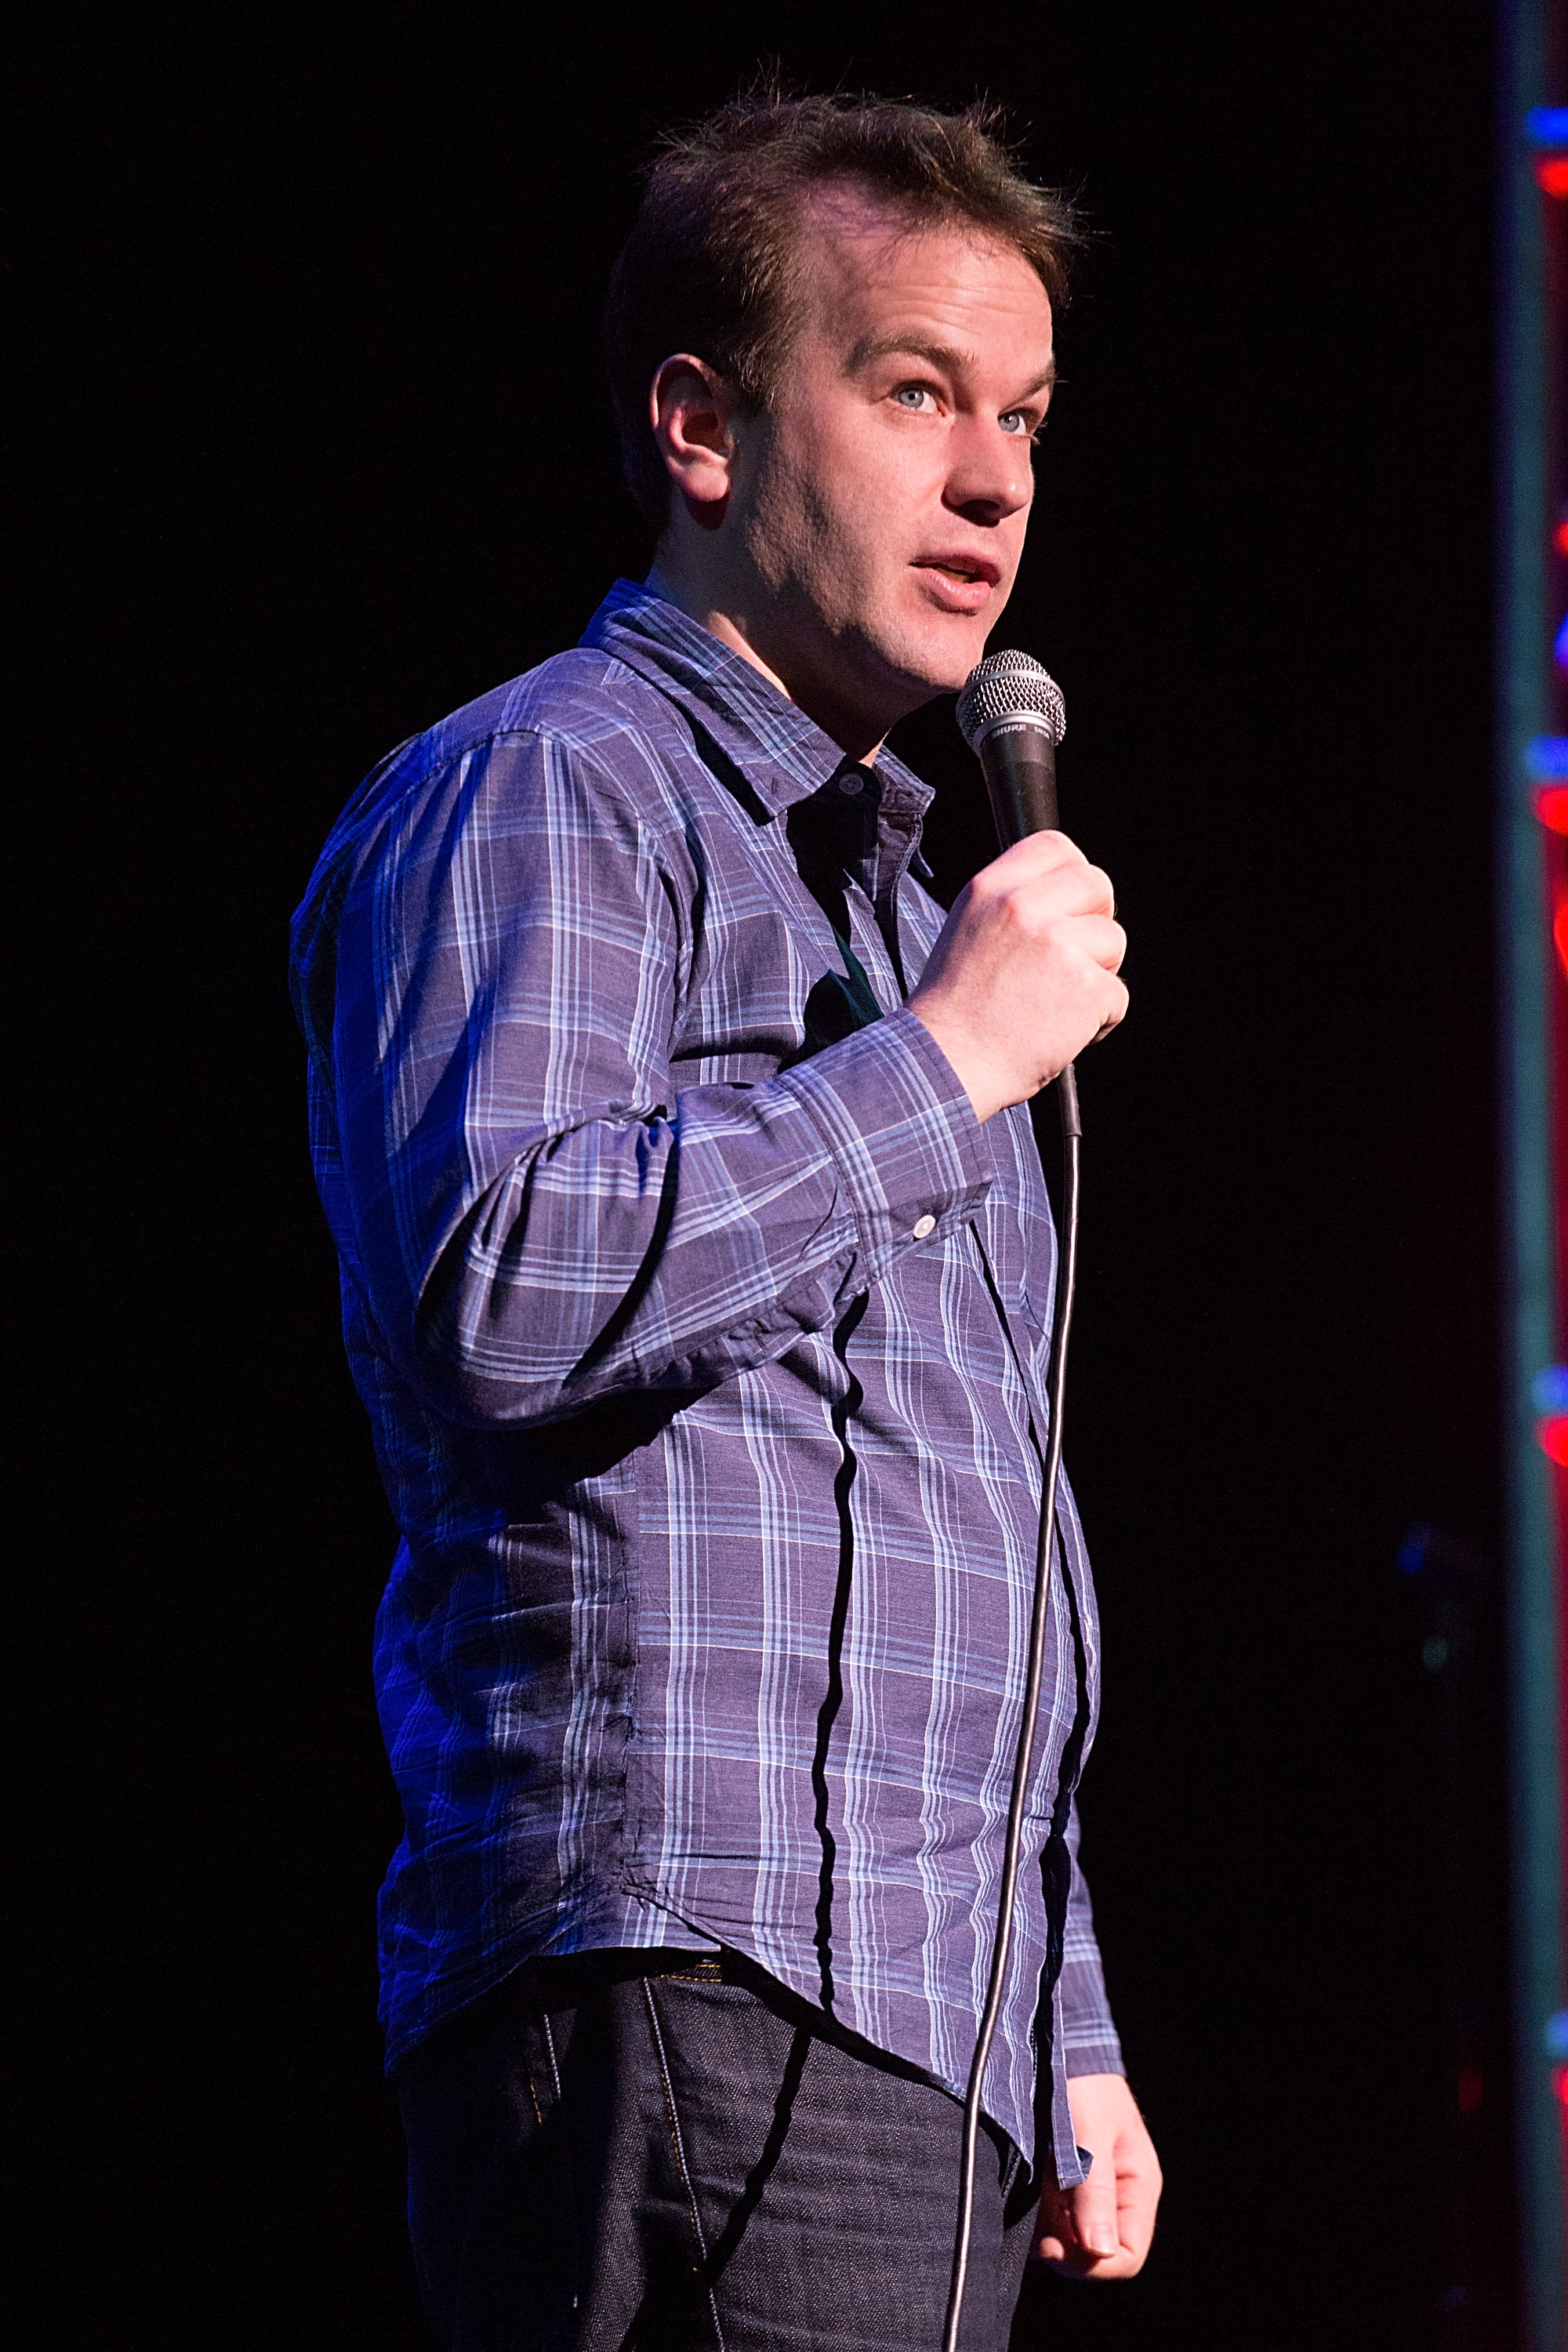 Comedian Mike Birbiglia performs on stage during the Moontower Comedy Festival at The Paramount Theater on April 25, 2014 in Austin, Texas. (Rick Kern&amp;amp;mdash;WireImage)